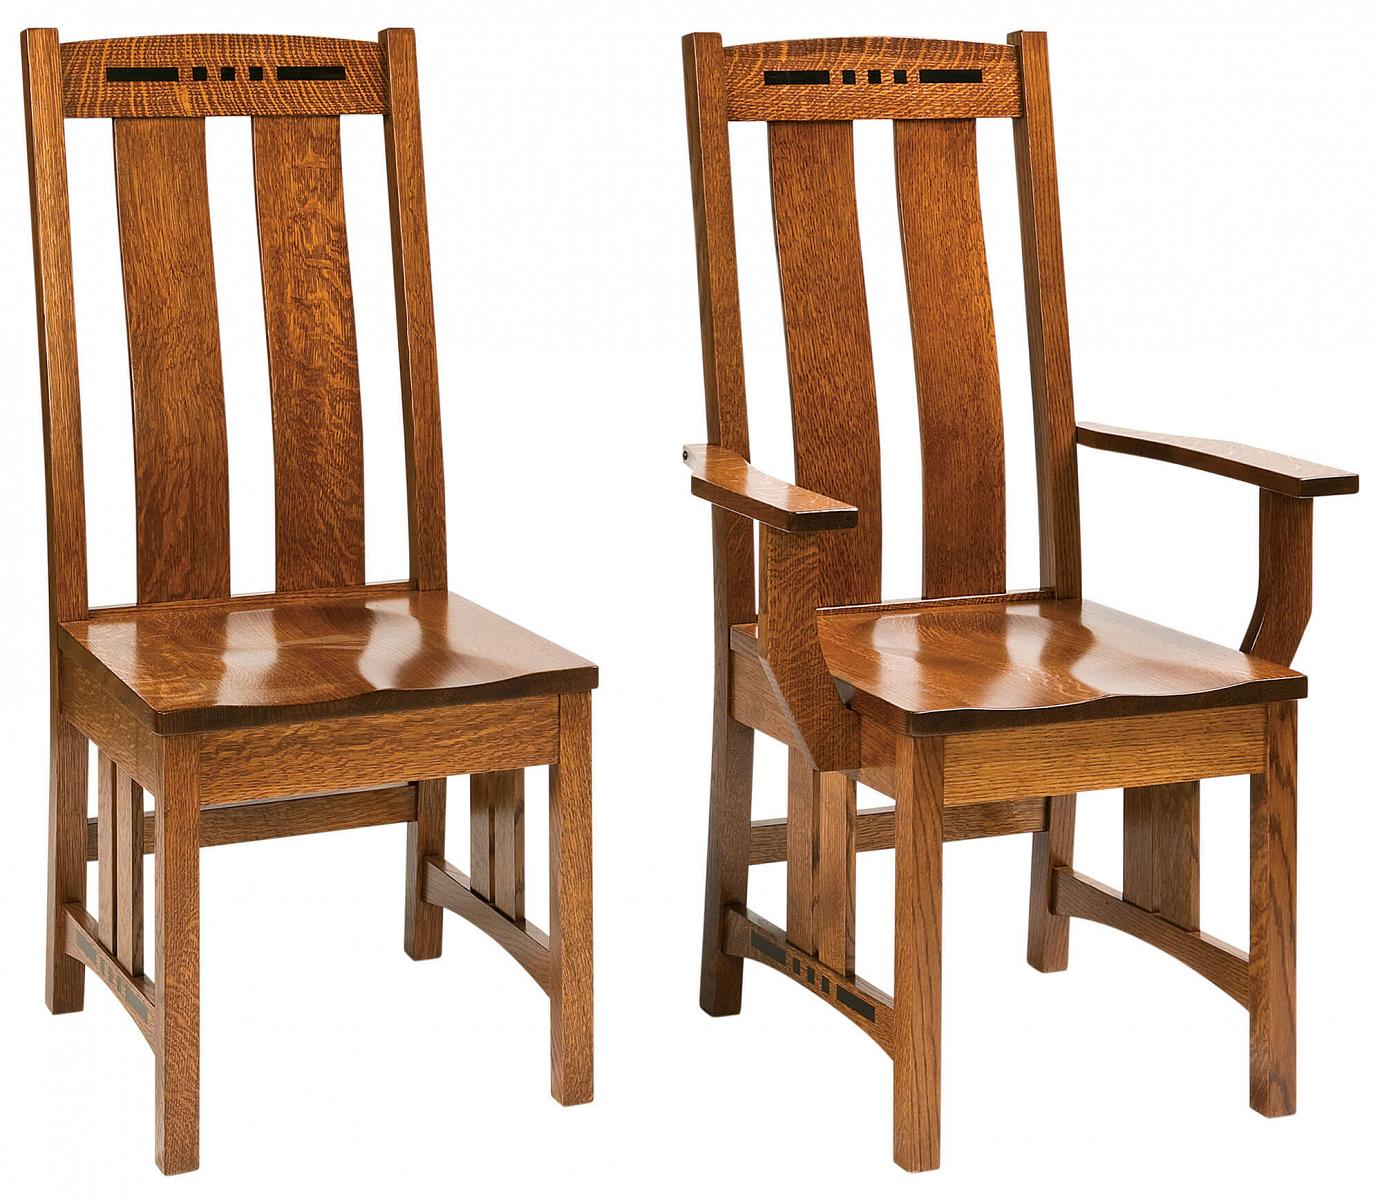 RH Yoder Colebrook Chairs